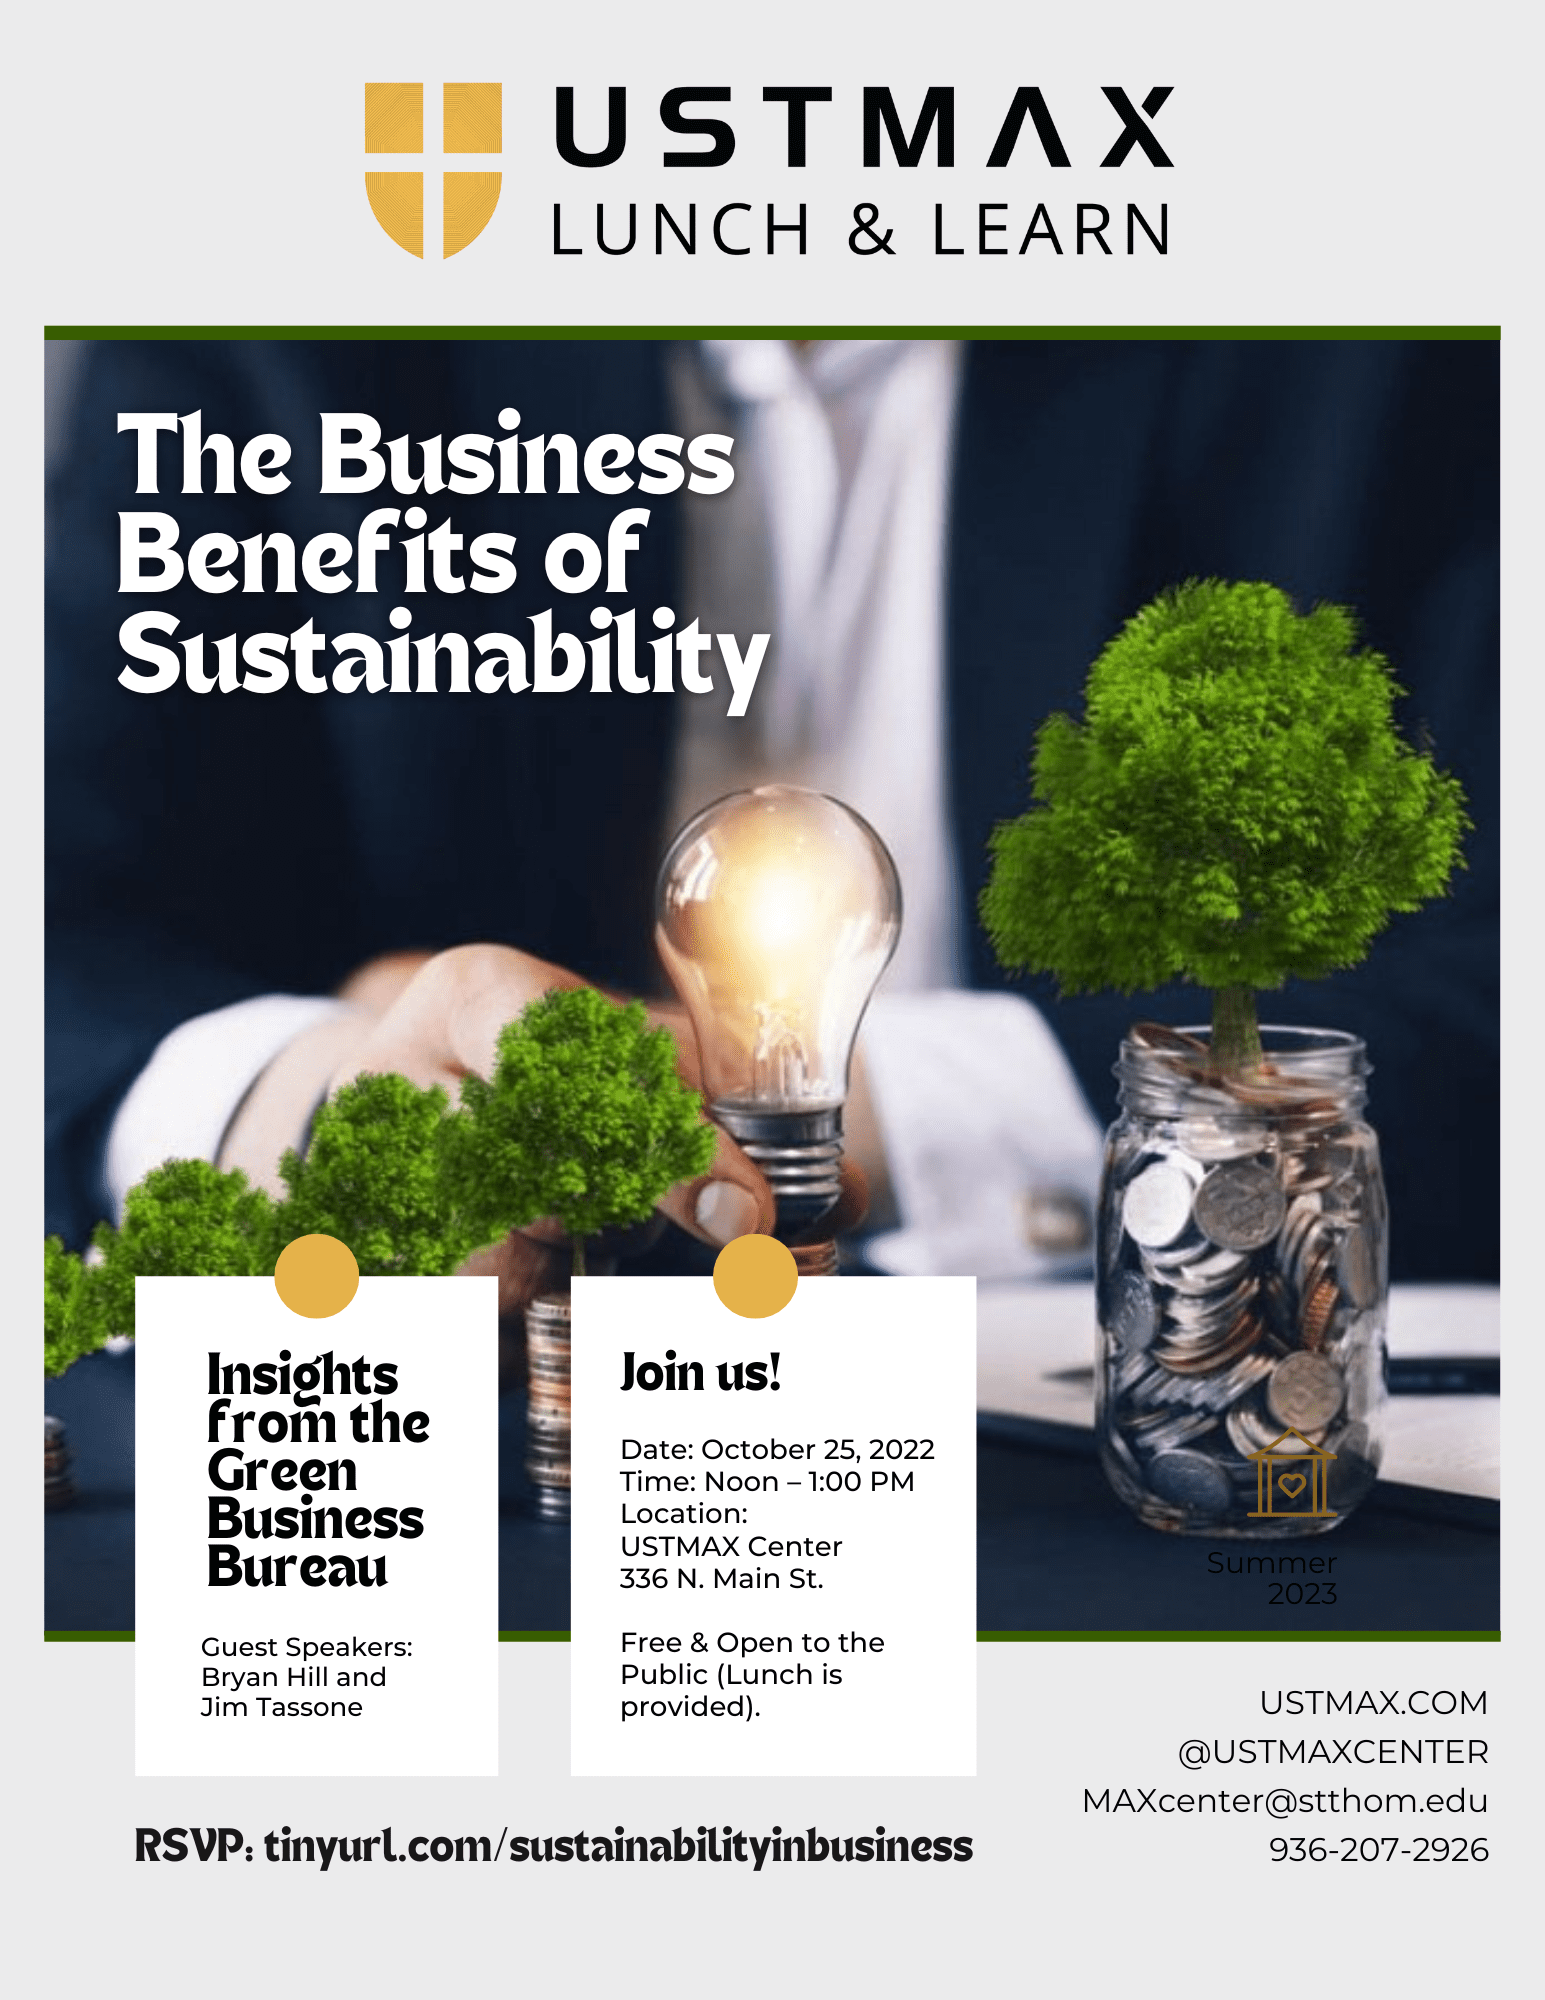 October 25: Lunch Learn on The Business Benefits of Sustainability